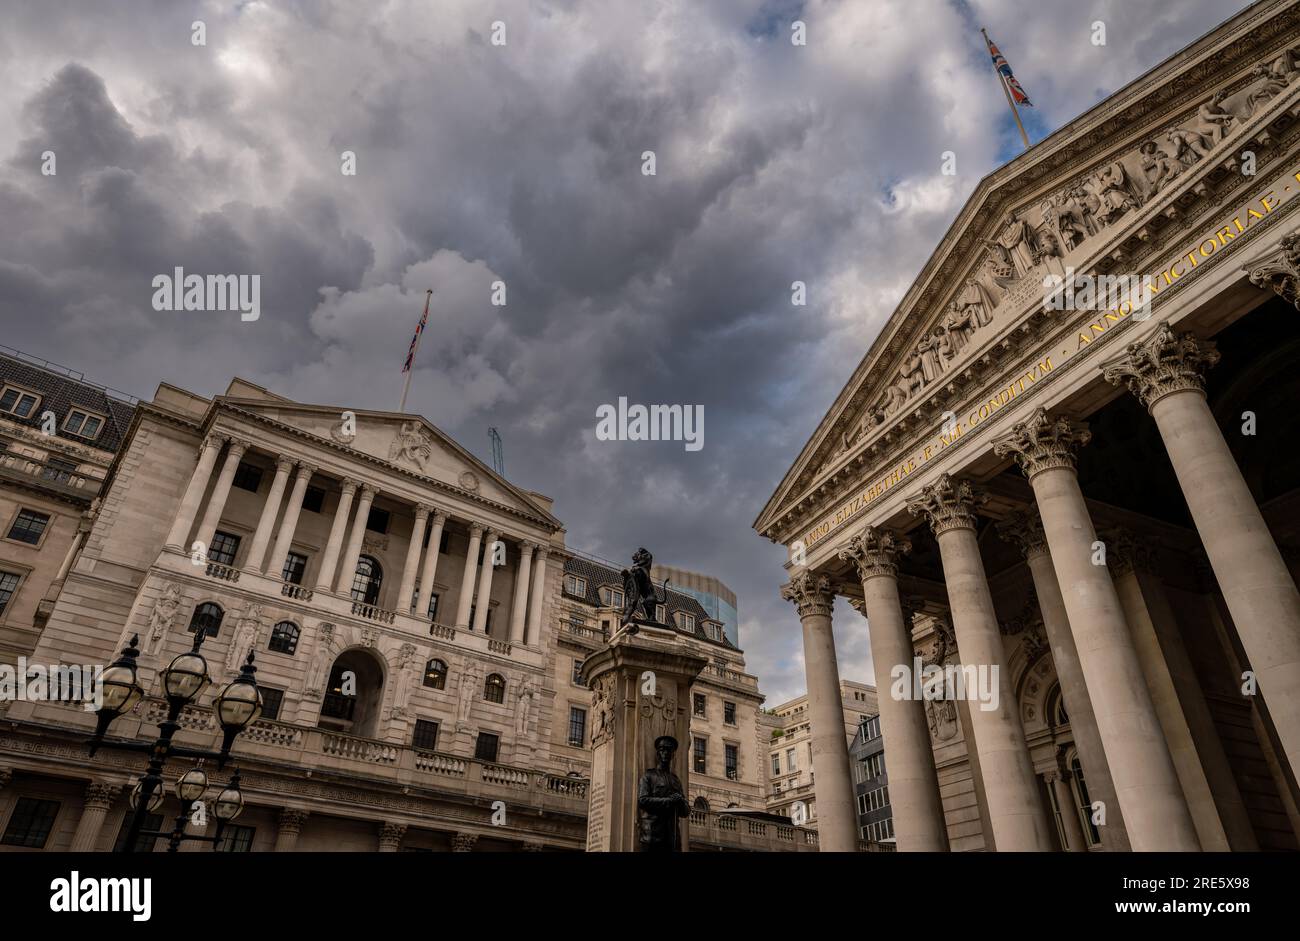 London, UK: The Bank of England on Threadneedle Street in the City of London (L) and The Royal Exchange (R). Stock Photo